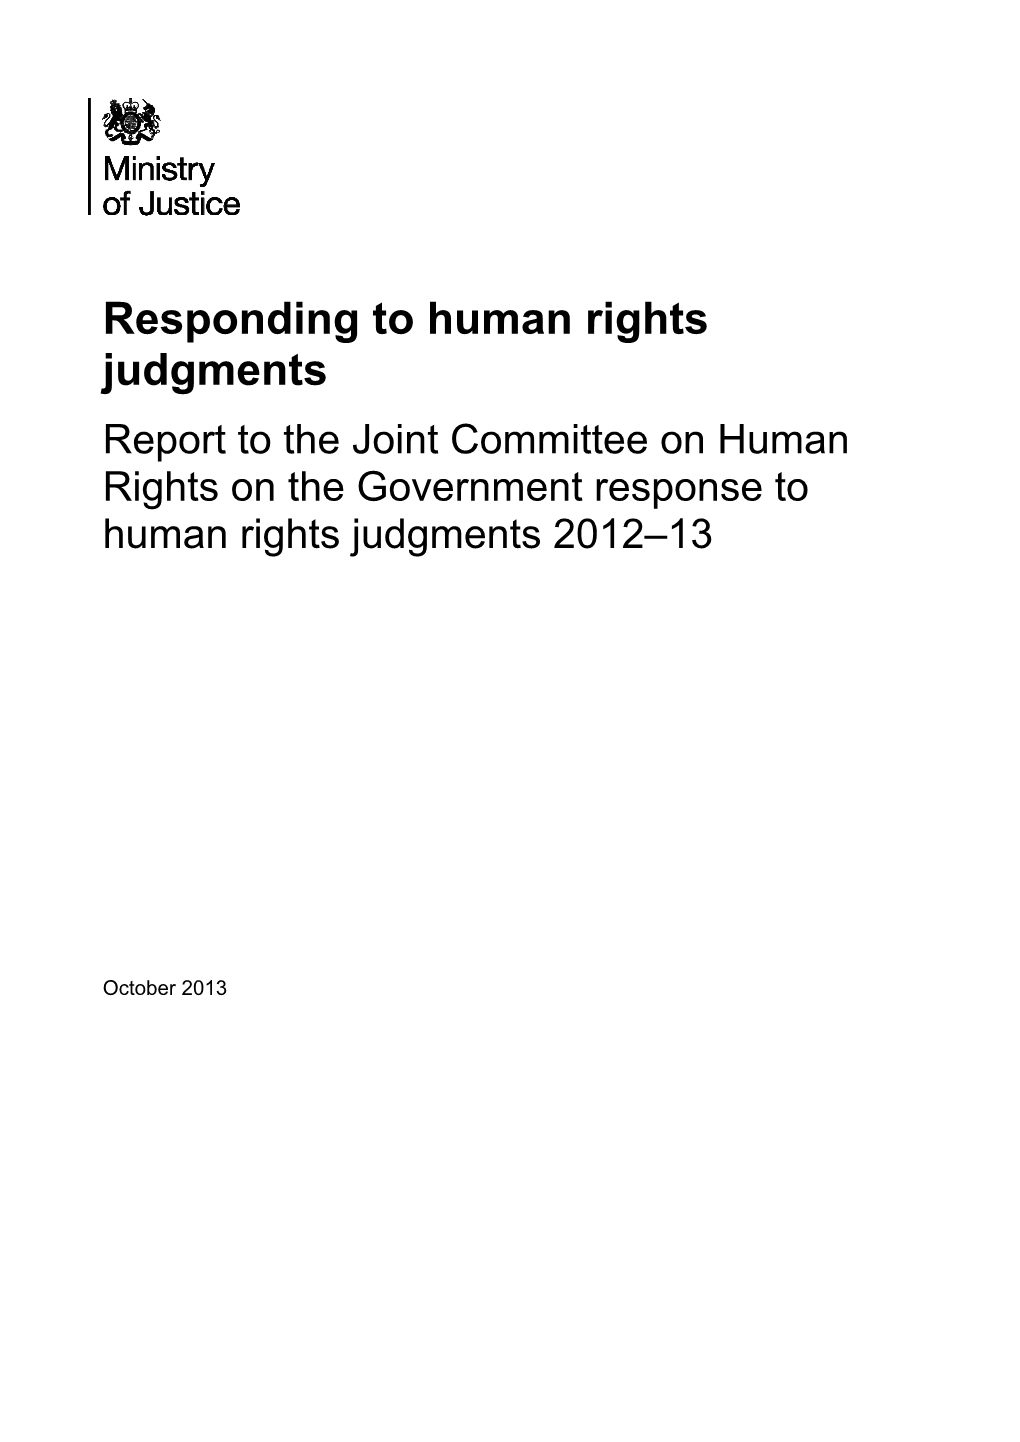 Responding to Human Rights Judgments Report to the Joint Committee on Human Rights on the Government Response to Human Rights Judgments 2012–13